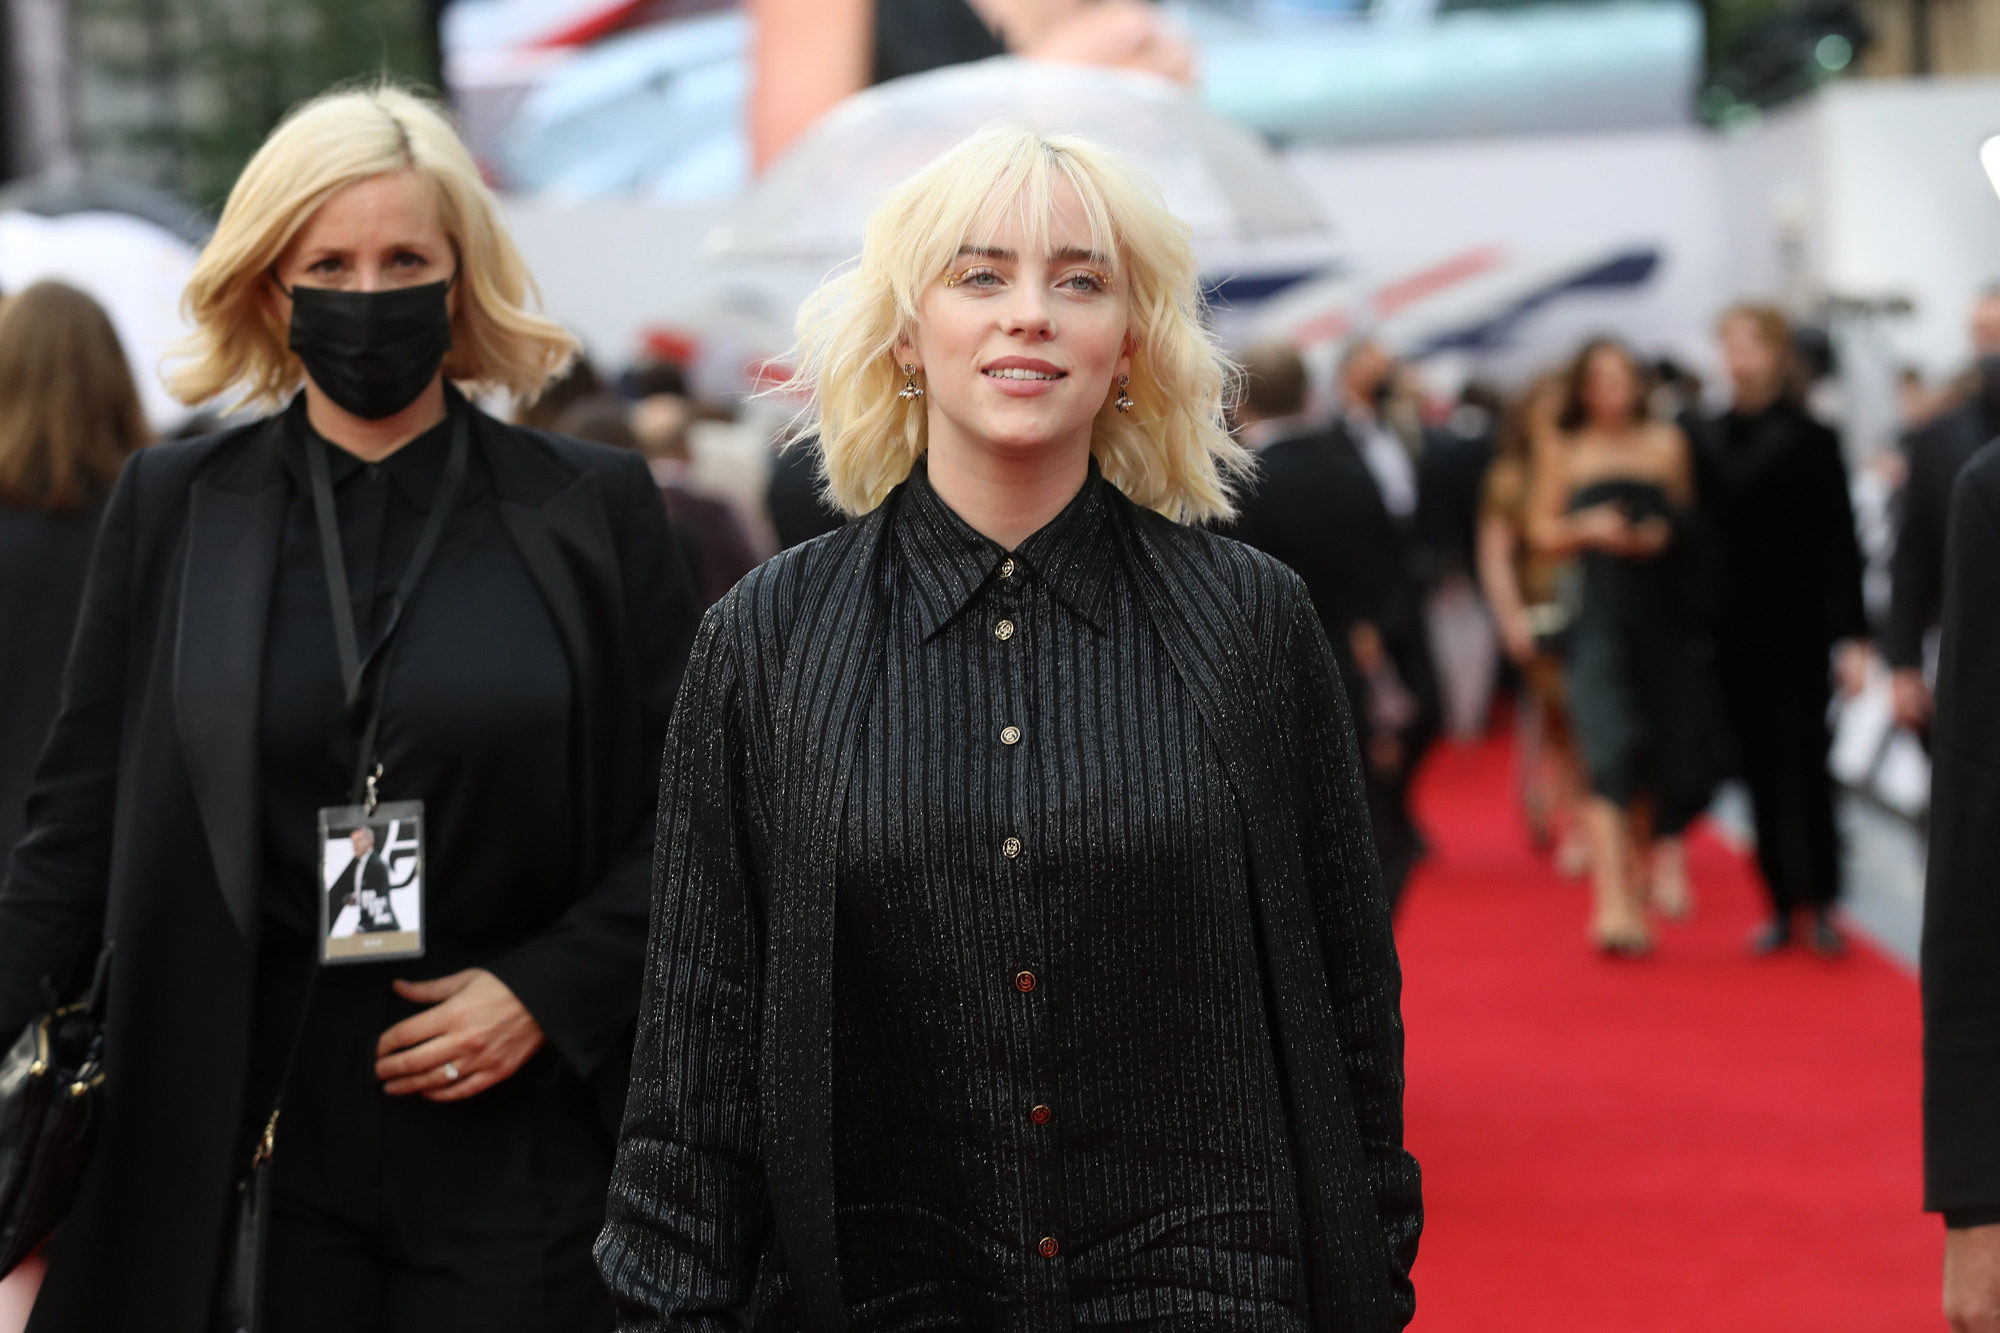 Musician Billie Eilish attends the World Premiere of "No Time to Die" at the Royal Albert Hall on September 28, 2021, in London.